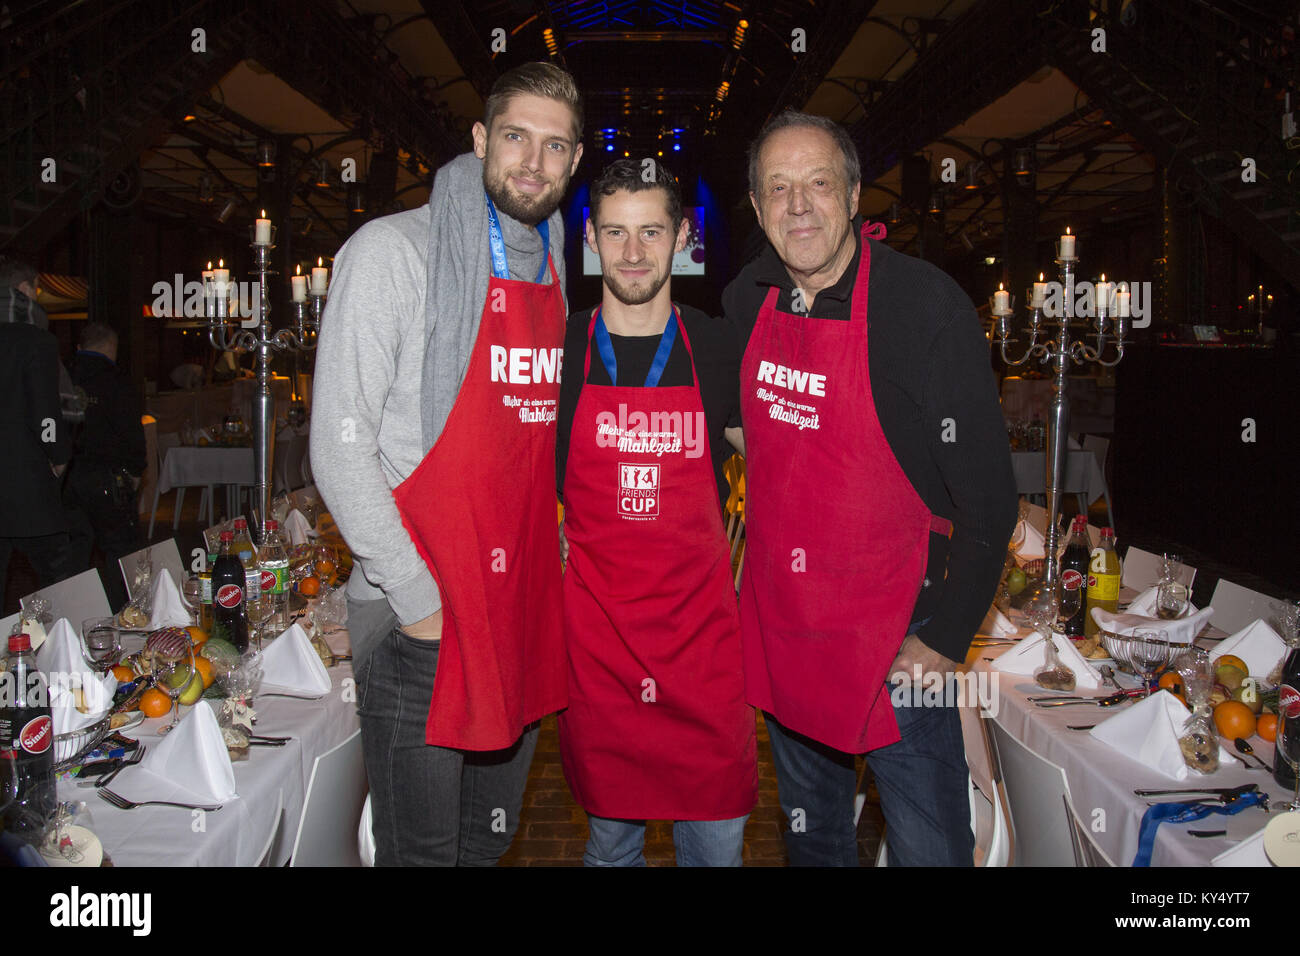 Celebrities attending the Charity christmas dinner for homeless people of Alsterradio at Fischauktionshalle, Hamburg  Featuring: Lasse Sobiech, Jan-Philipp Kalla, Rolf Fuhrmann Where: Hamburg, Germany When: 12 Dec 2017 Credit: Schultz-Coulon/WENN.com Stock Photo